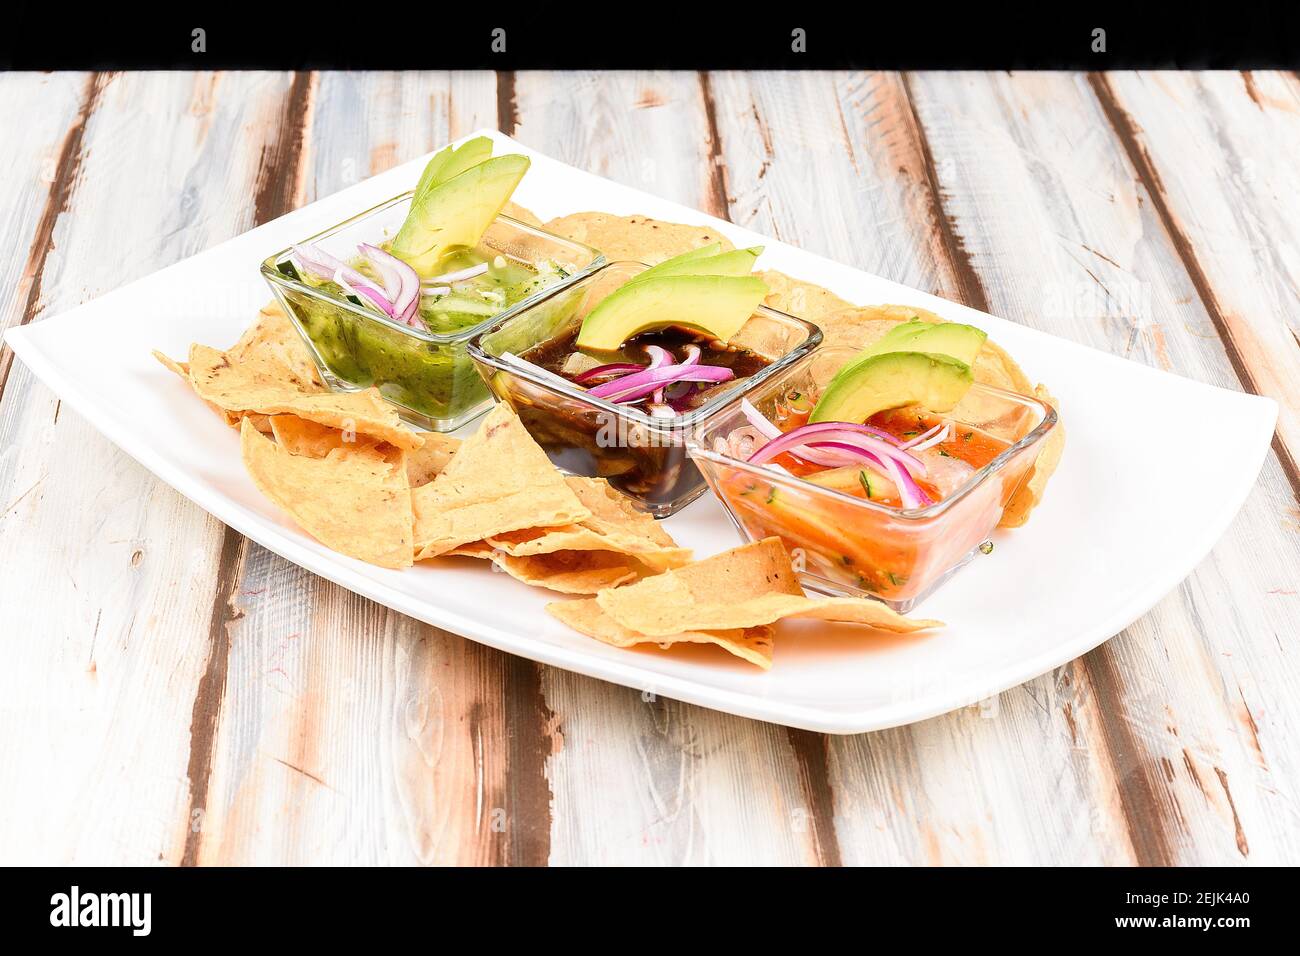 Plate with ceviches prepared with different sauces accompanied with tortillas or avocado Stock Photo